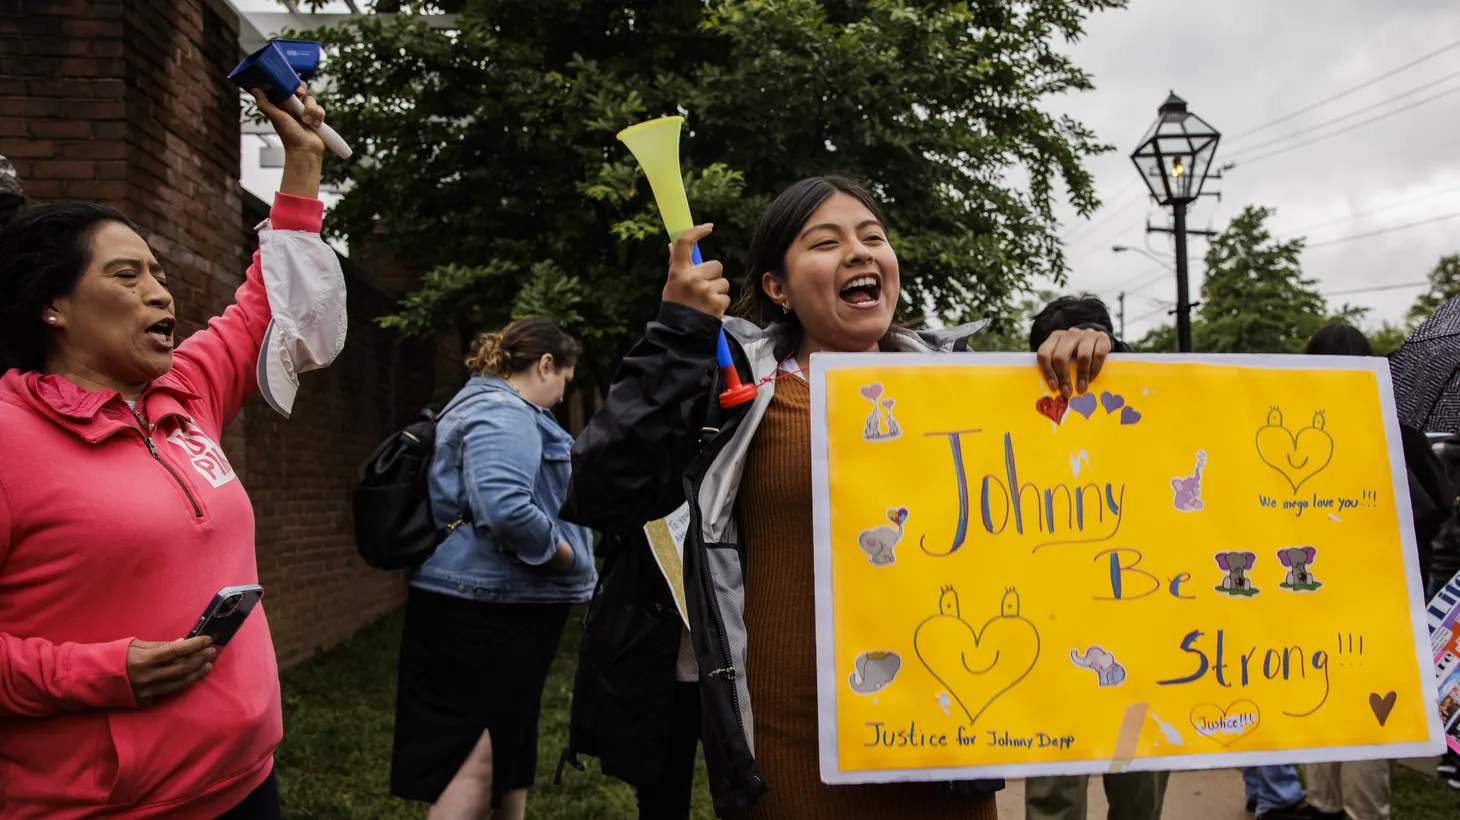 Fans of actor Johnny Depp wait for him to arrive at the Fairfax Circuit Court on May 24, 2022 in Fairfax, Va.